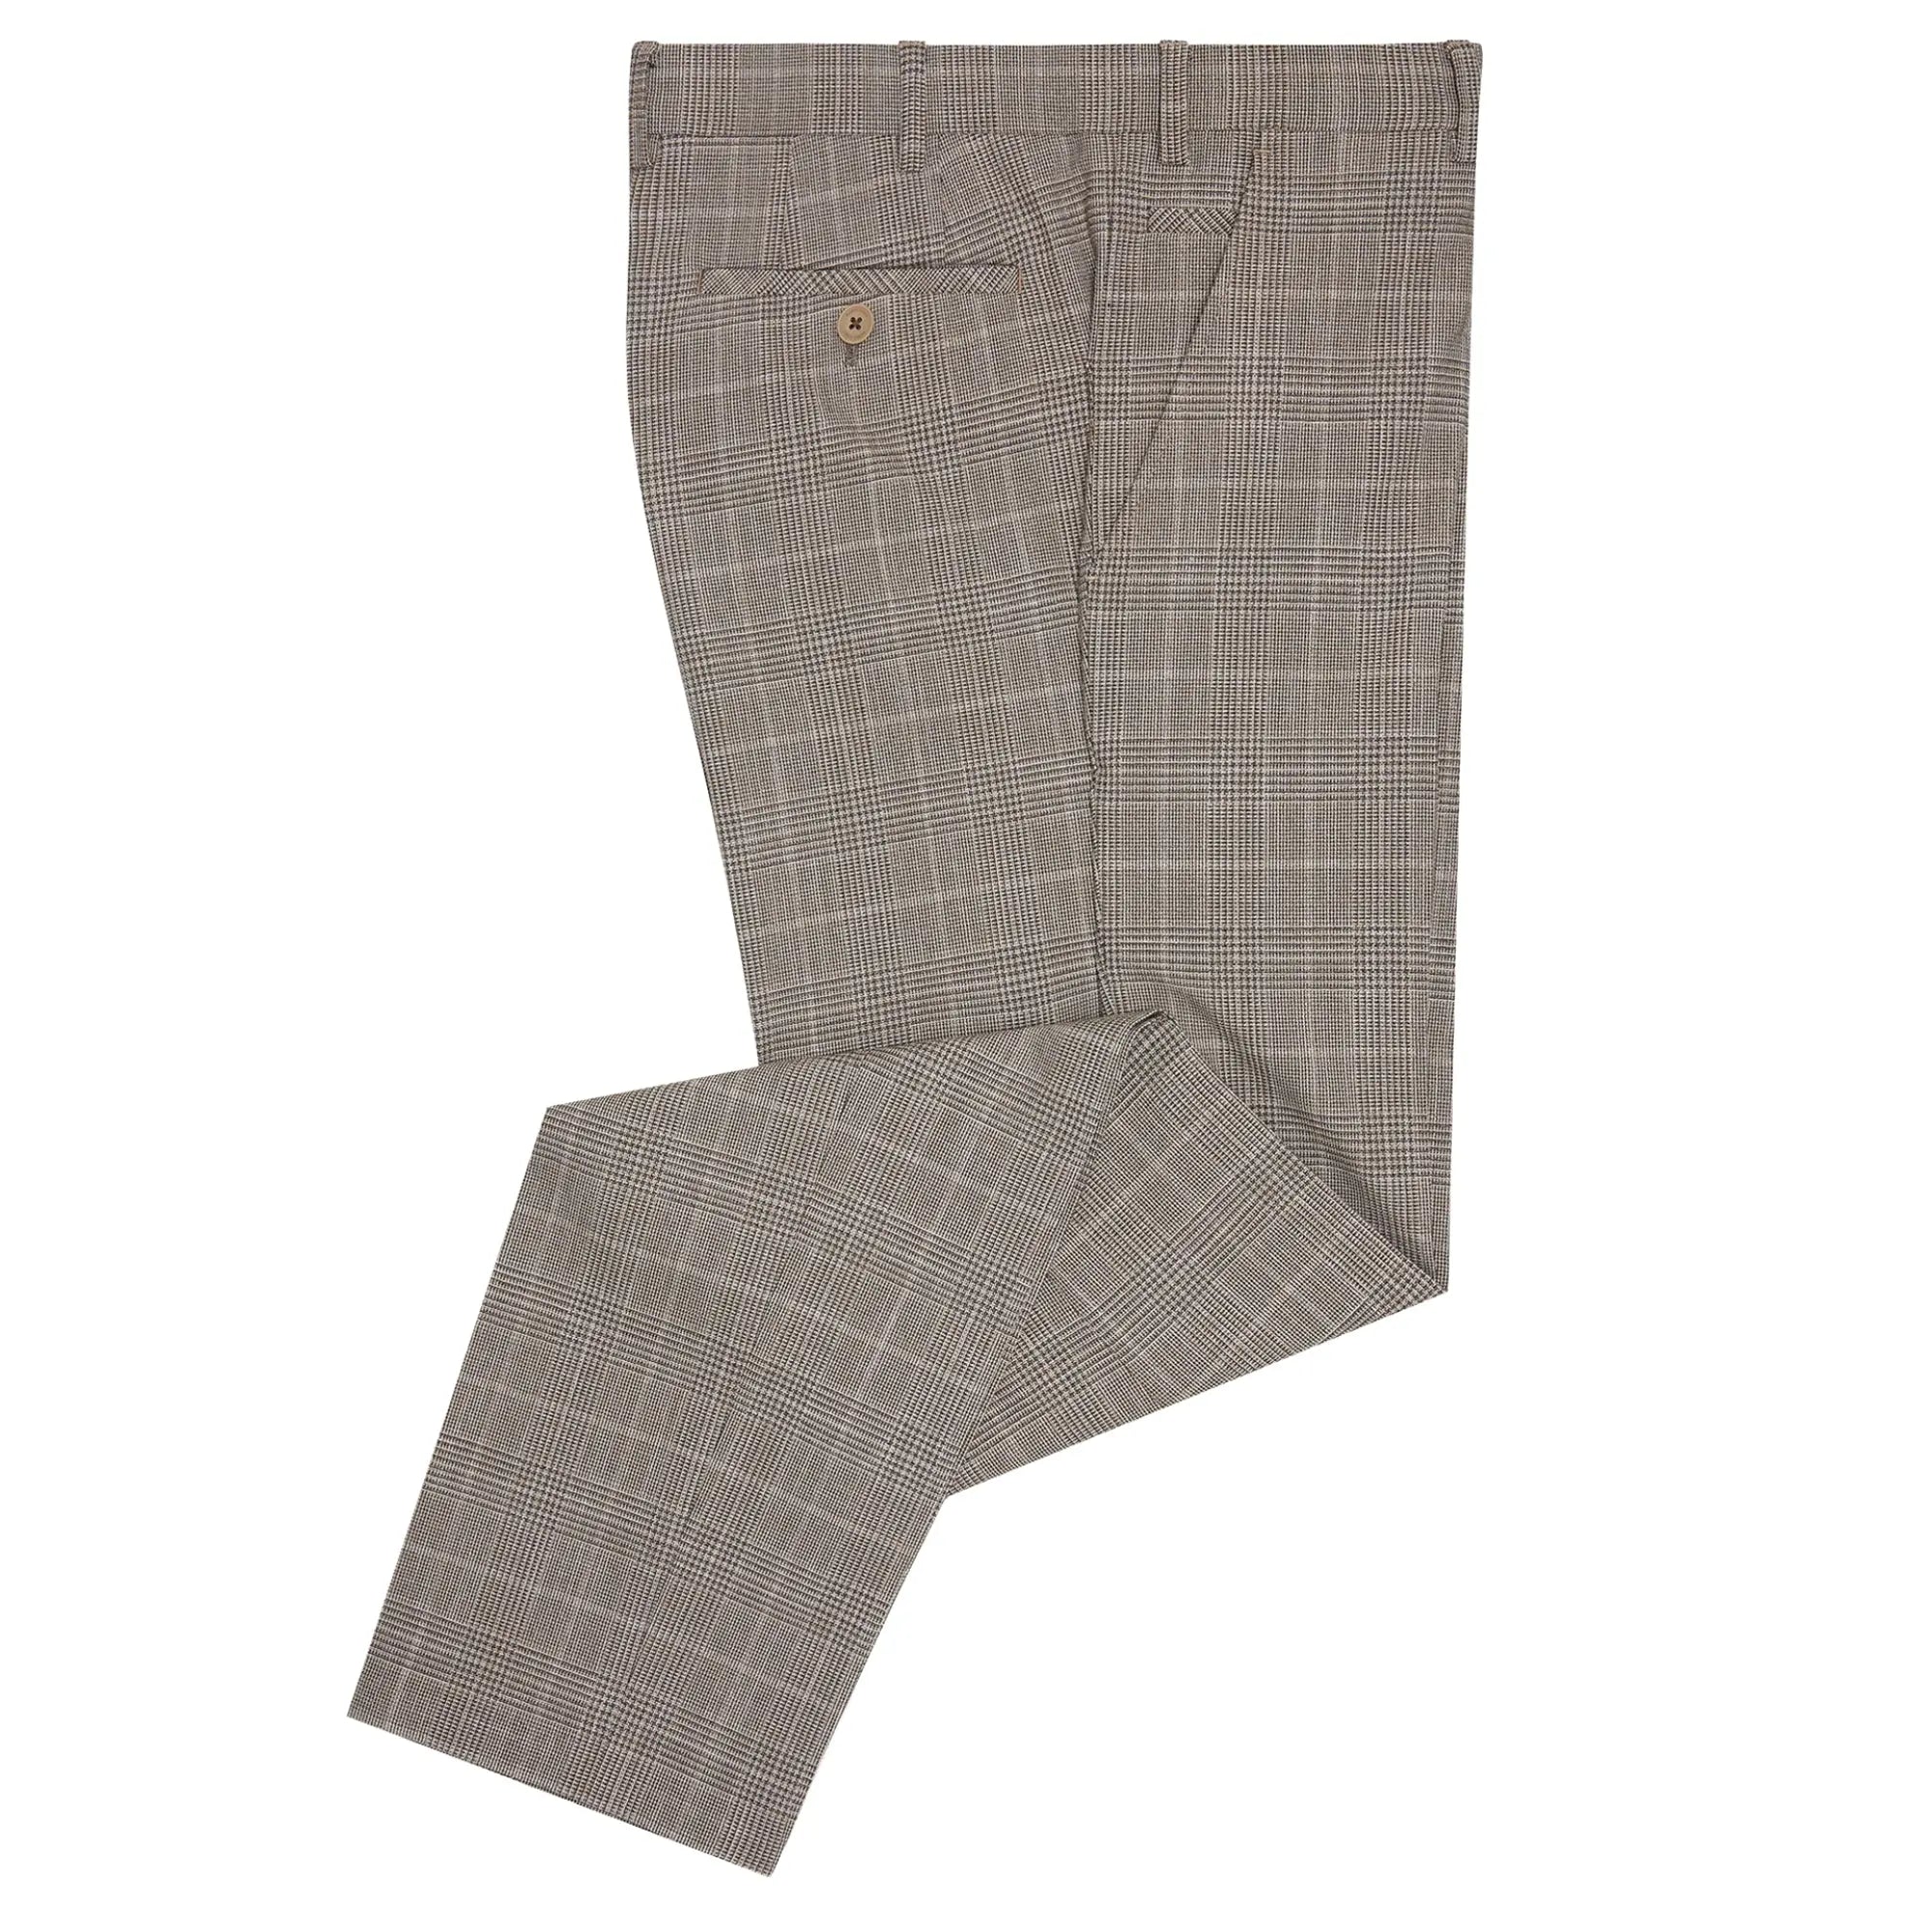 Remus Uomo Matteo Prince Of Wales Suit Trousers - Brown